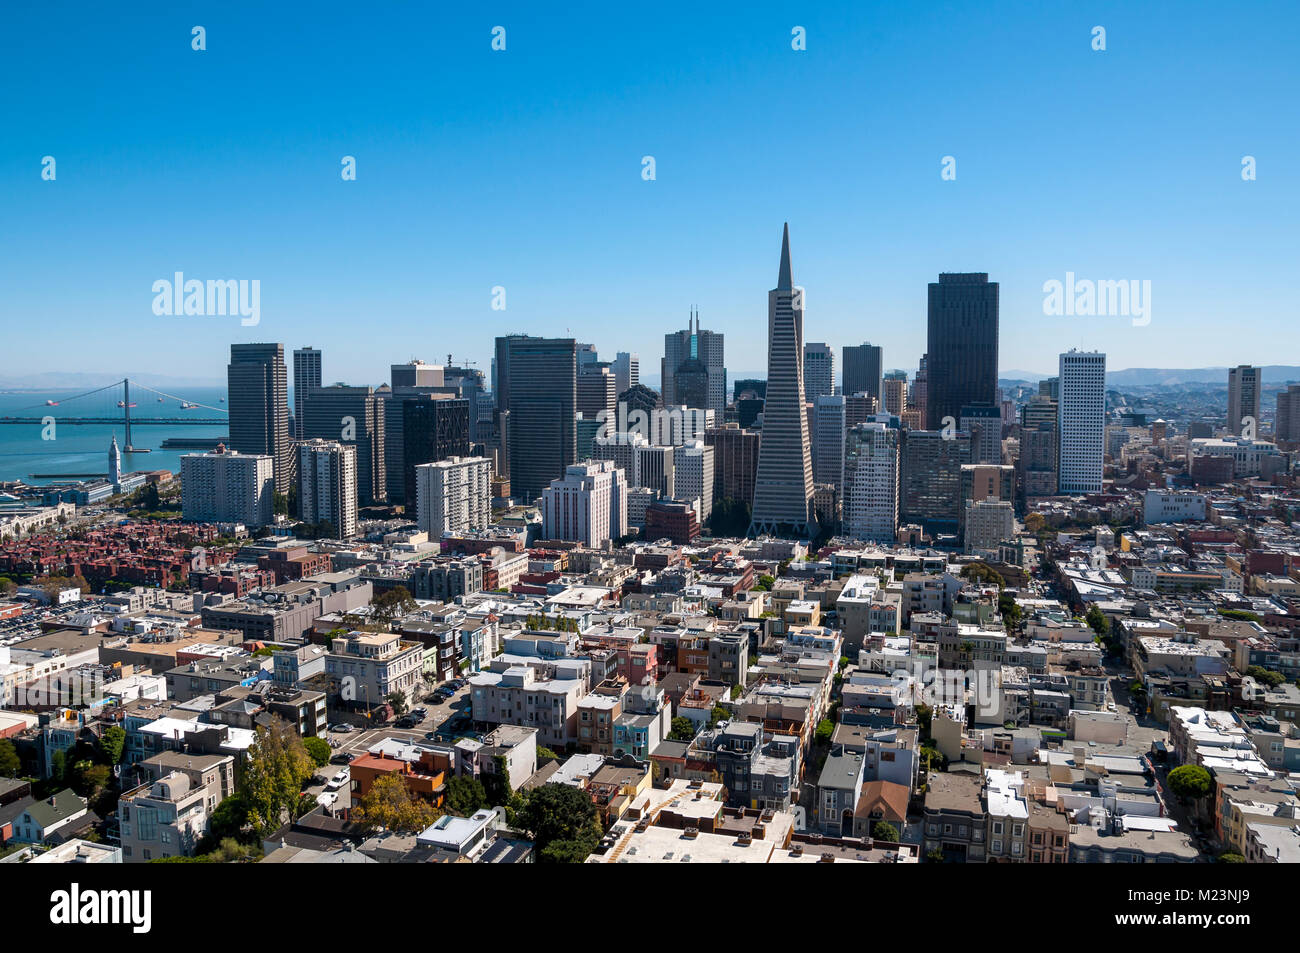 SAN FRANCISCO, CALIFORNIA - SEPTEMBER 9, 2015 - View of the Financial District from Coit Tower Stock Photo